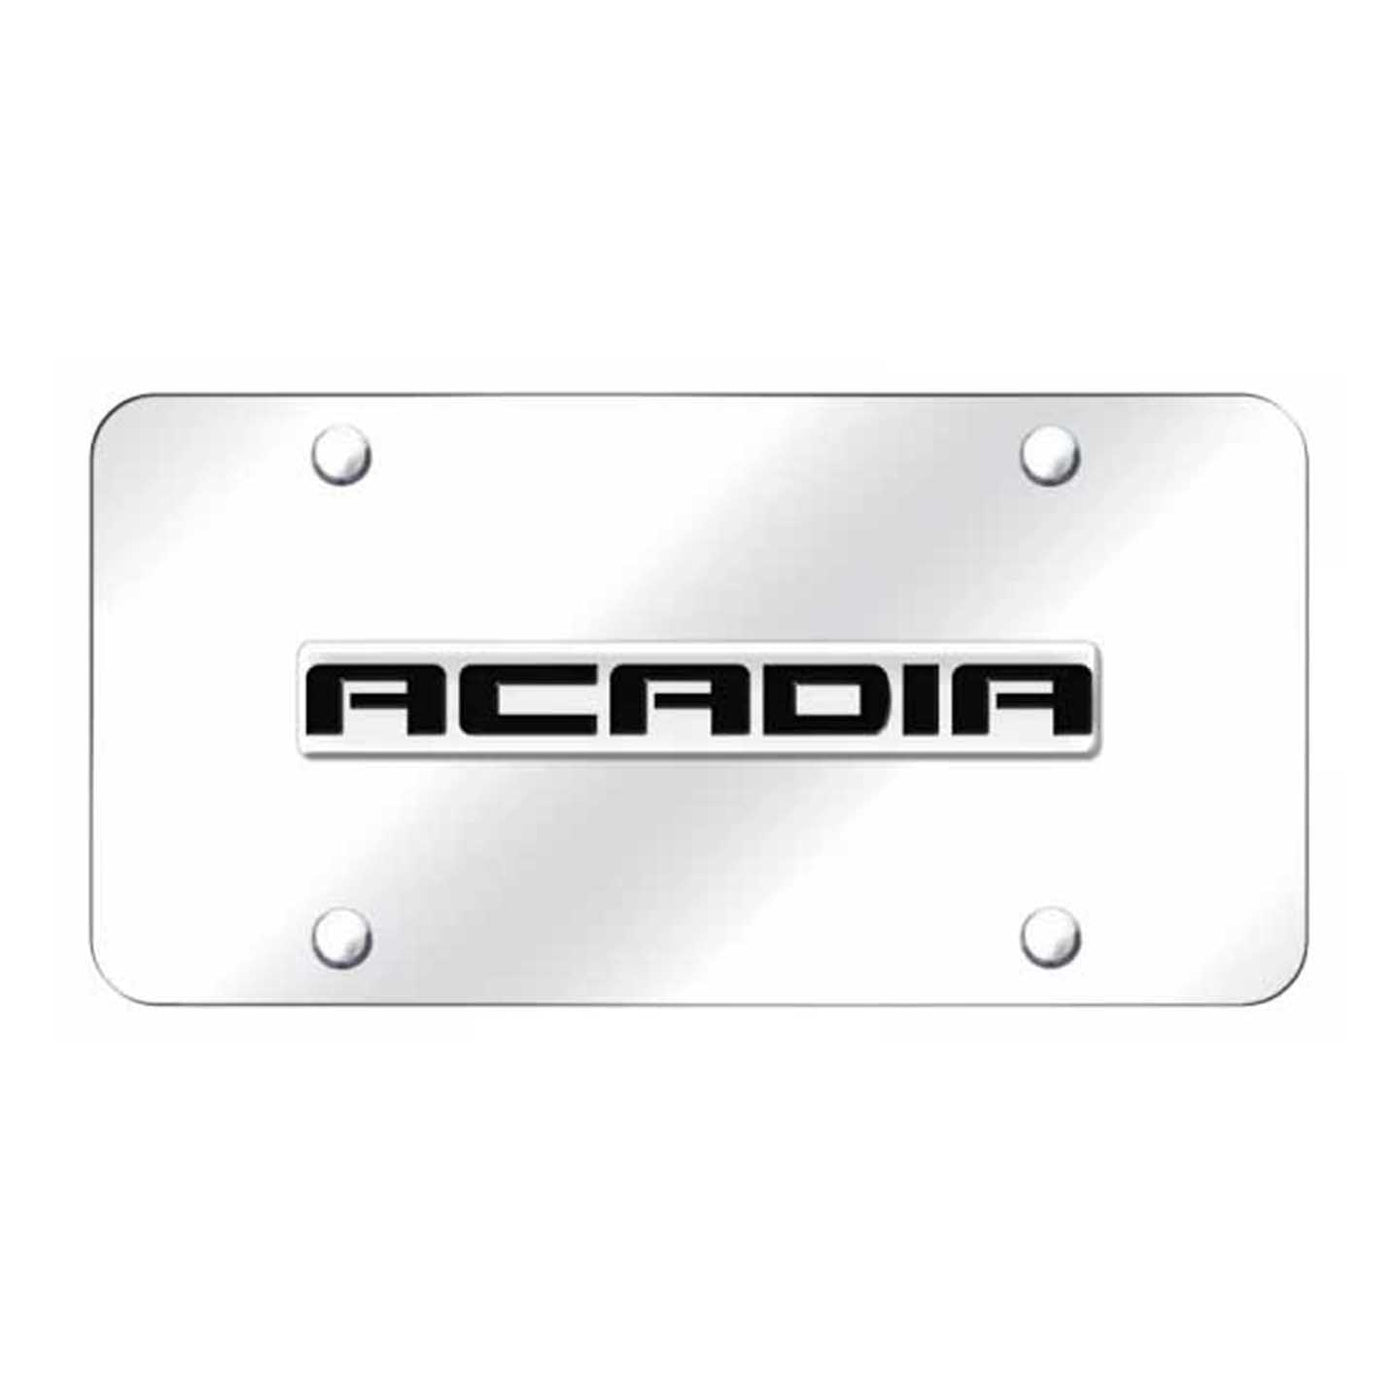 Acadia Name License Plate - Chrome on Mirrored